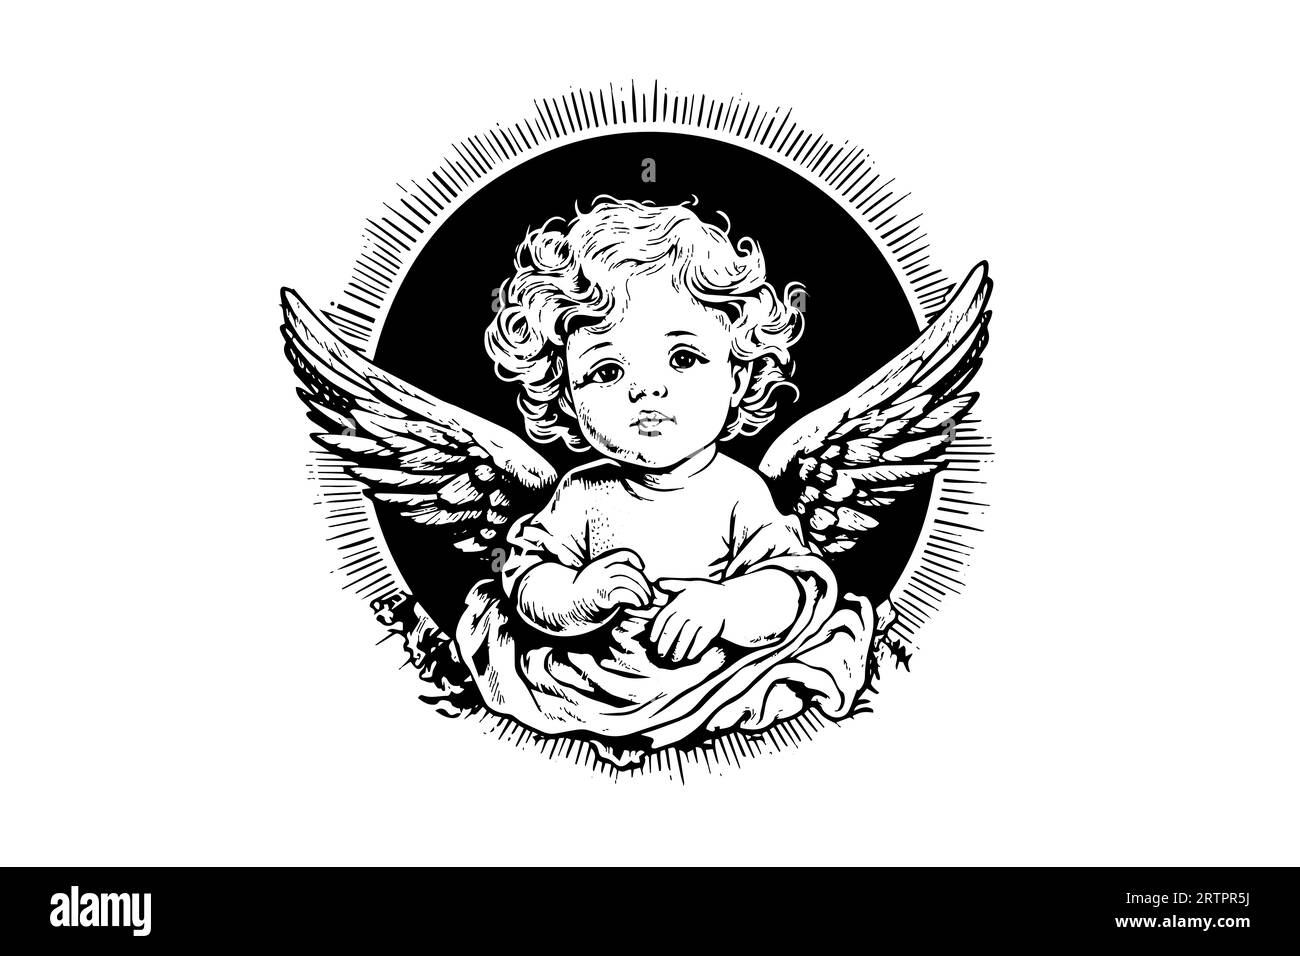 Little angel in frame vector retro style engraving black and white illustration. Cute baby with wings. Stock Vector